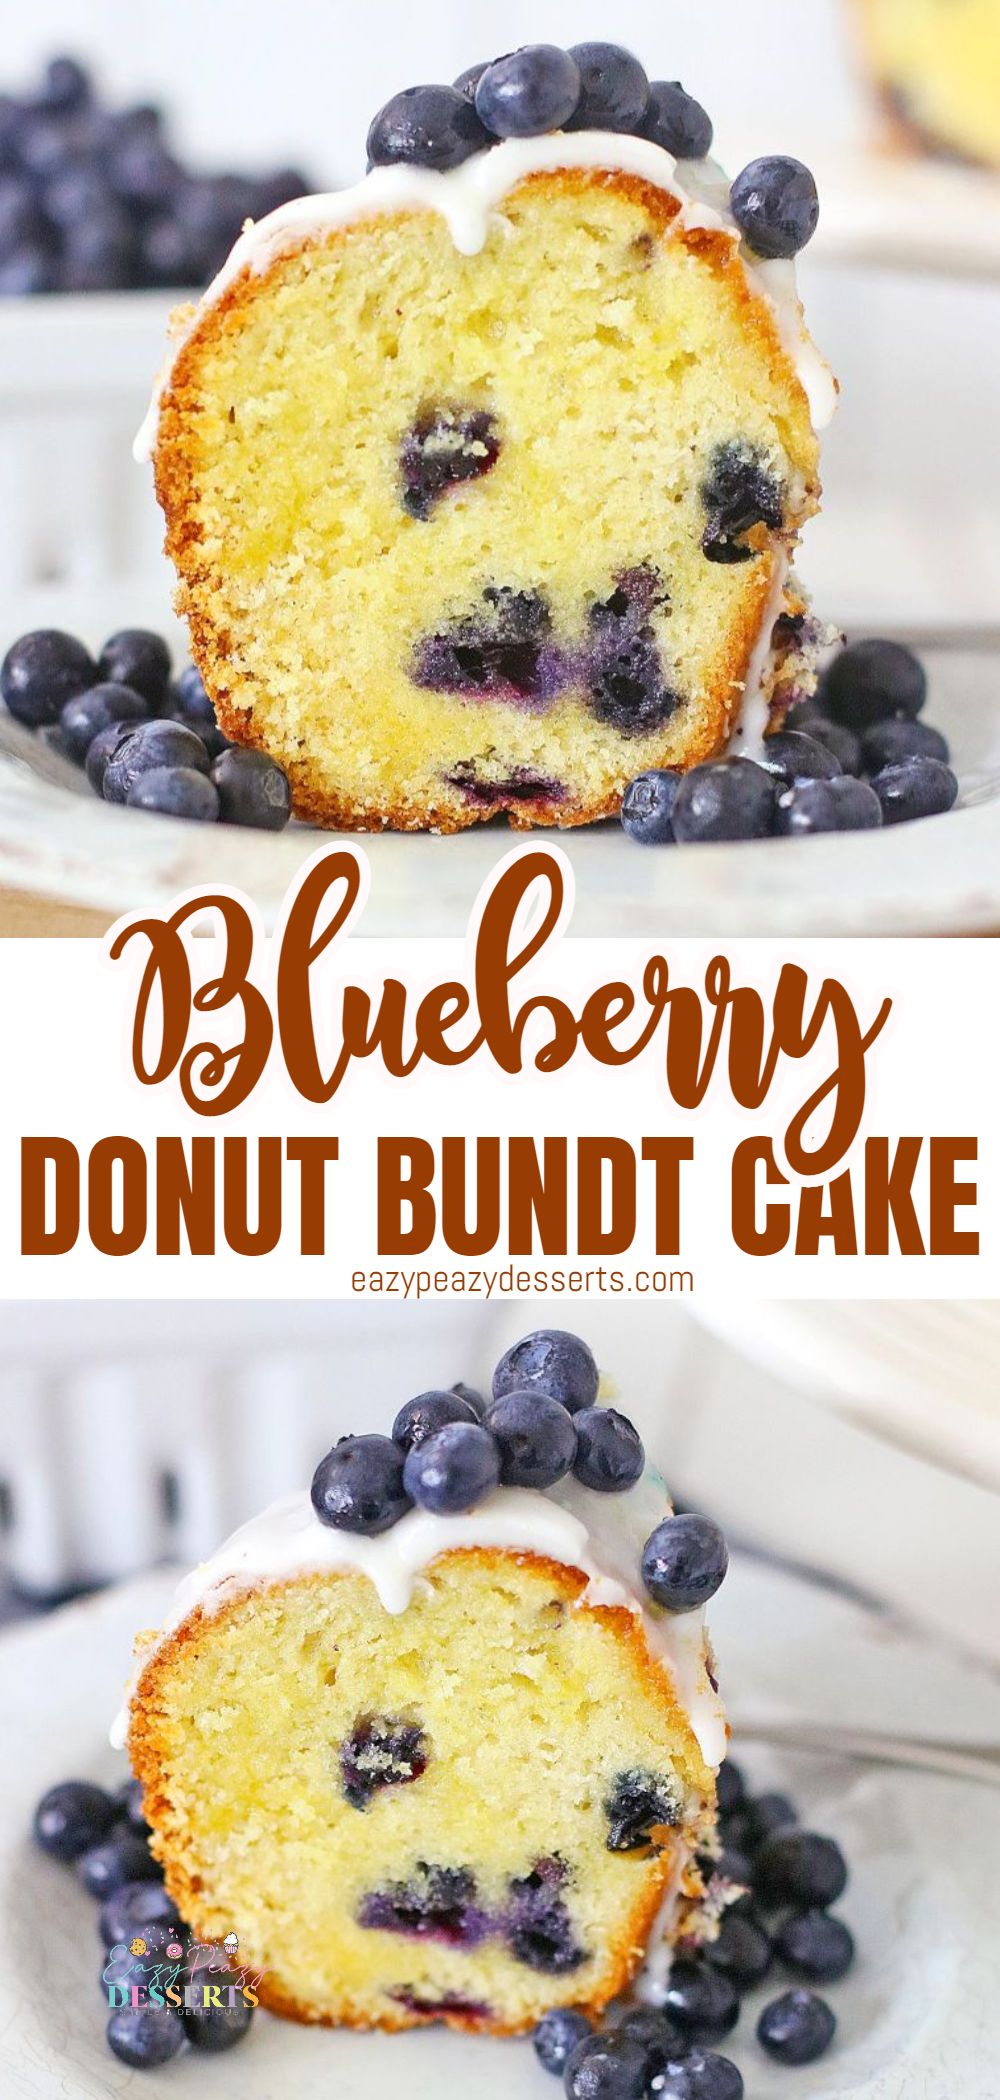 Photo collage of donut cake with blueberries baked in a Bundt pan